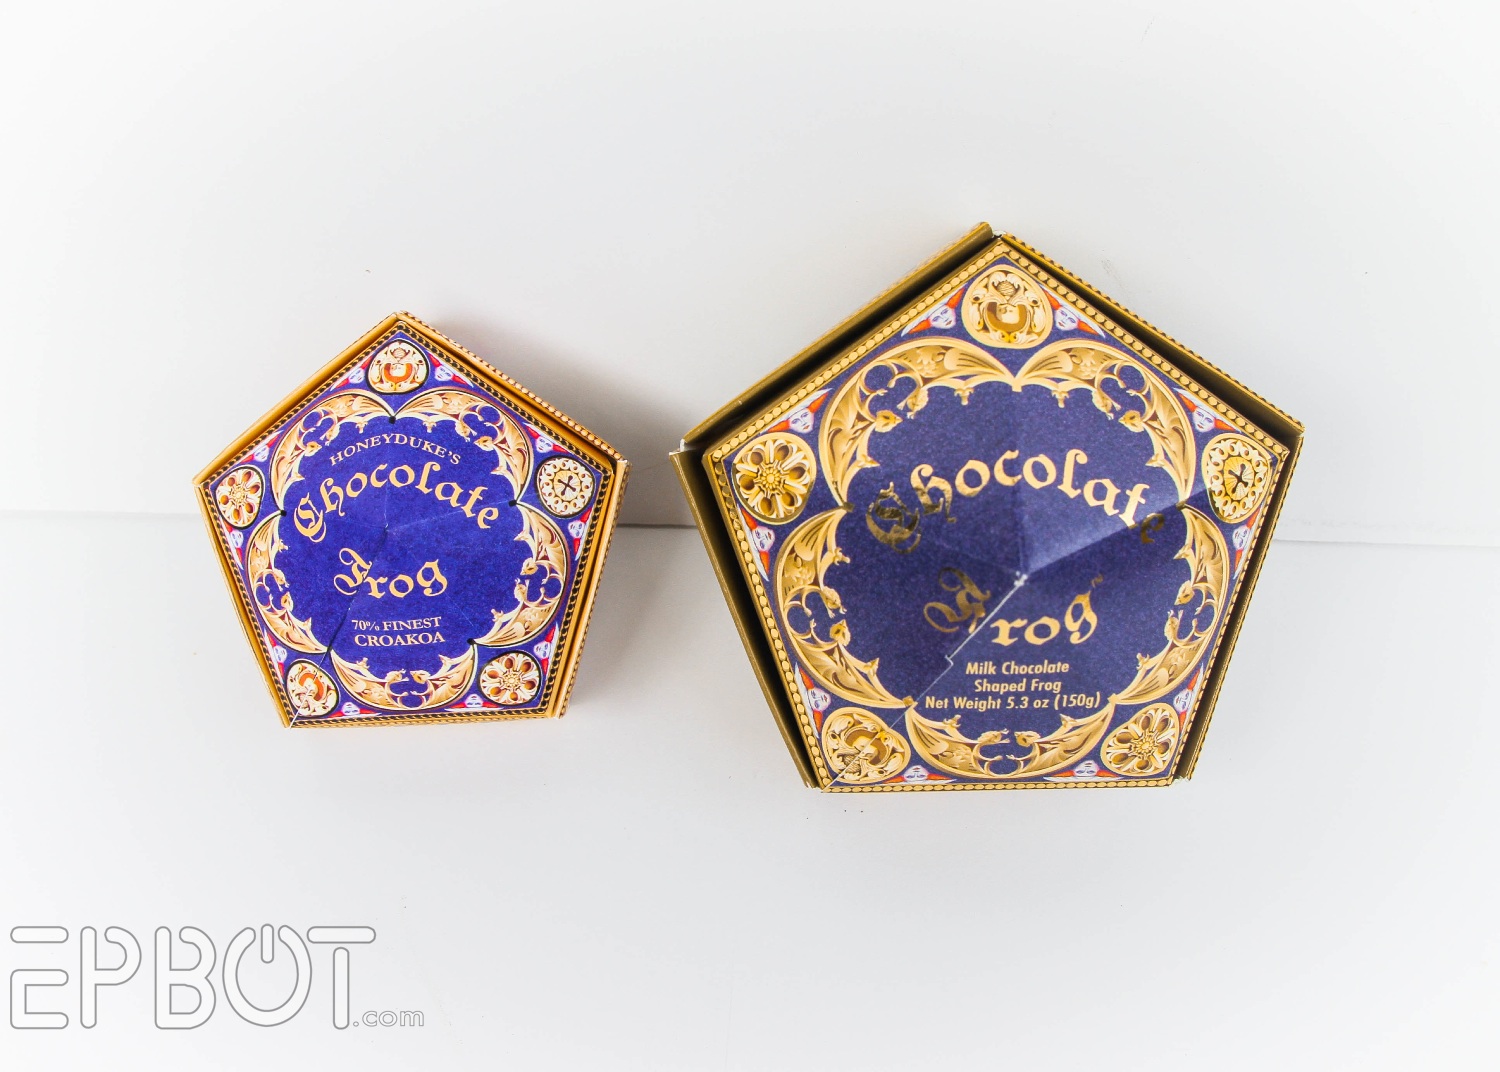 Epbot Diy Chocolate Frog Ornaments For Your Tree